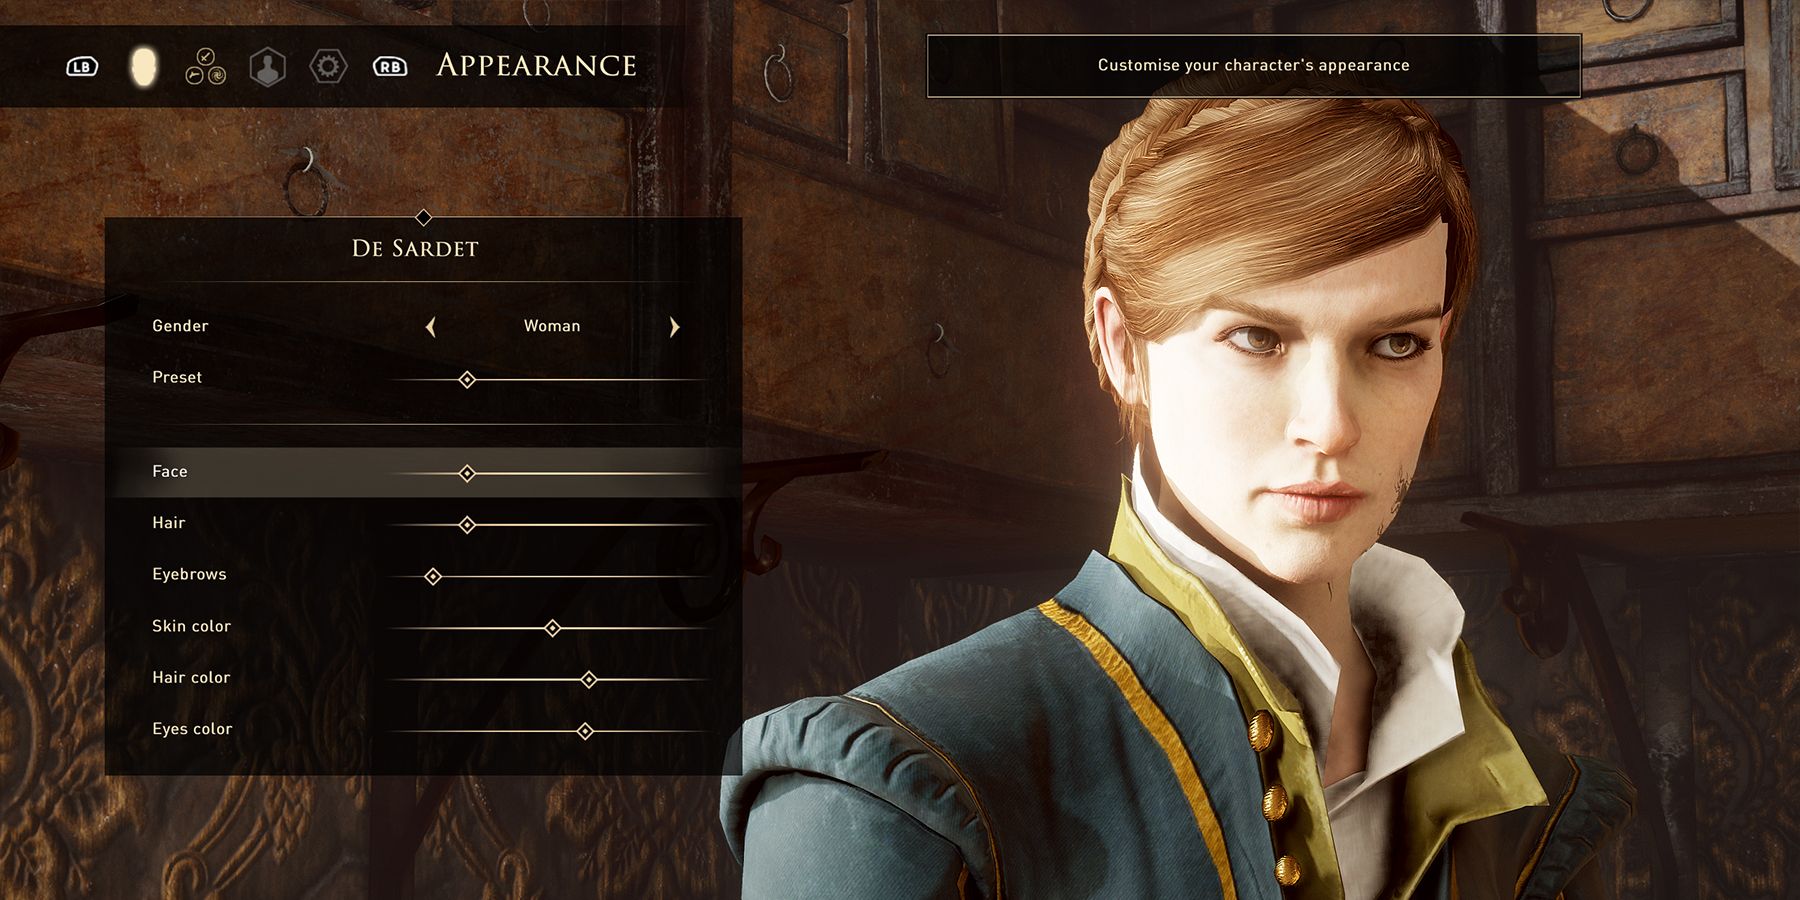 Customizing a character's appearance in GreedFall